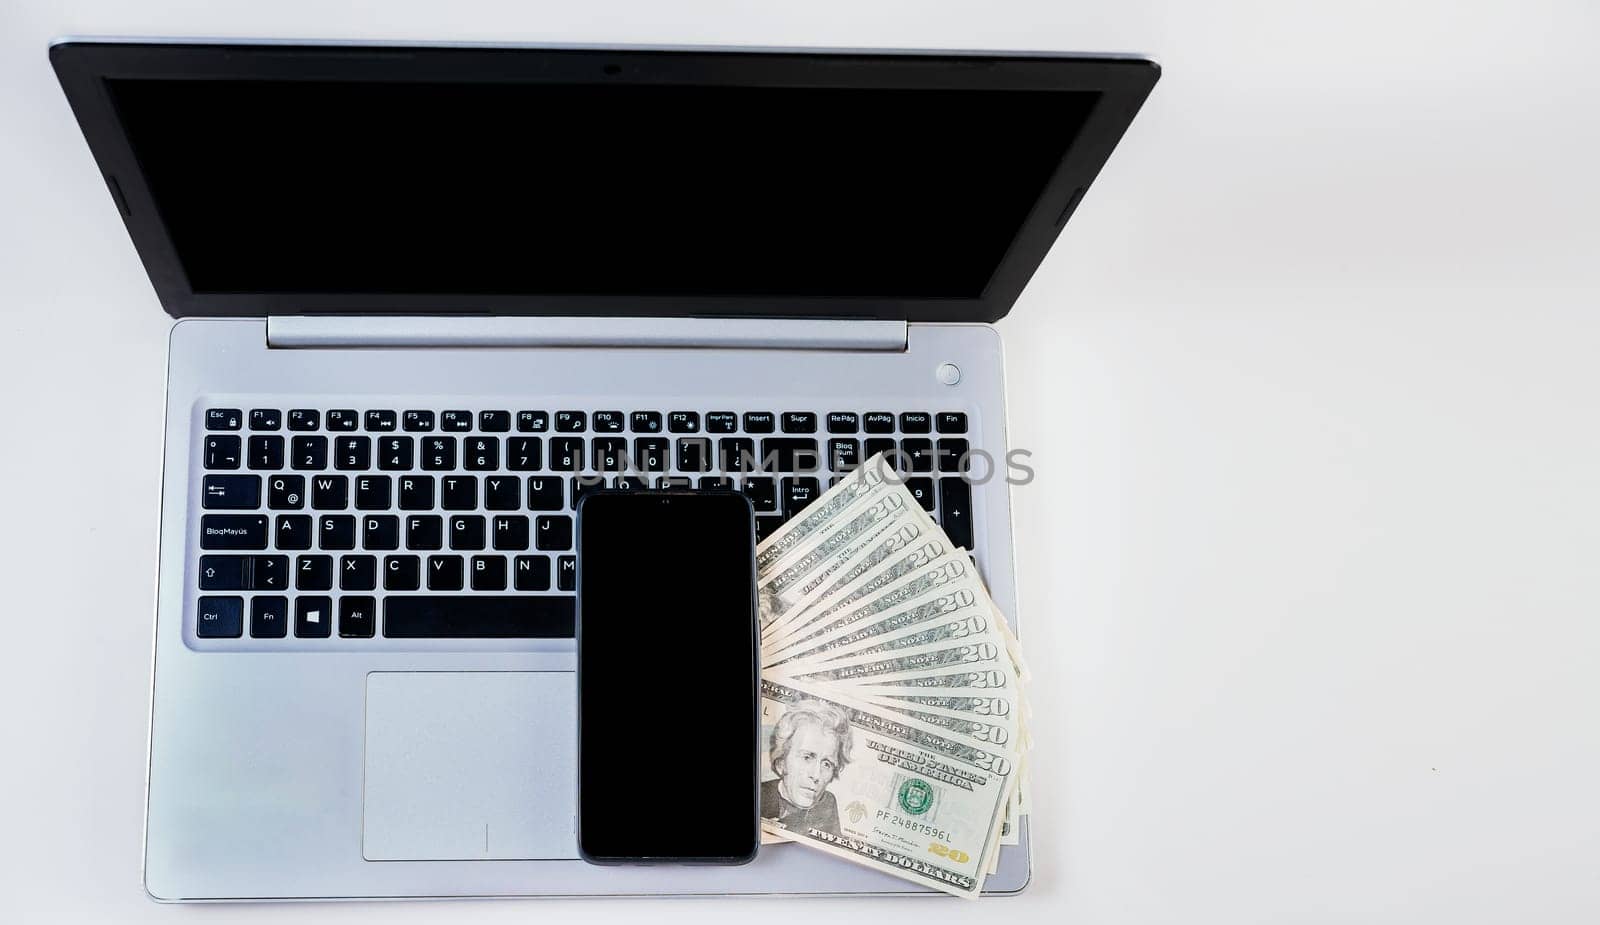 Top view of laptop with cell phone and dollar bills. Cell phone on laptop keyboard and dollar bills. Mobile phone on top of dollar bills on laptop keyboard by isaiphoto